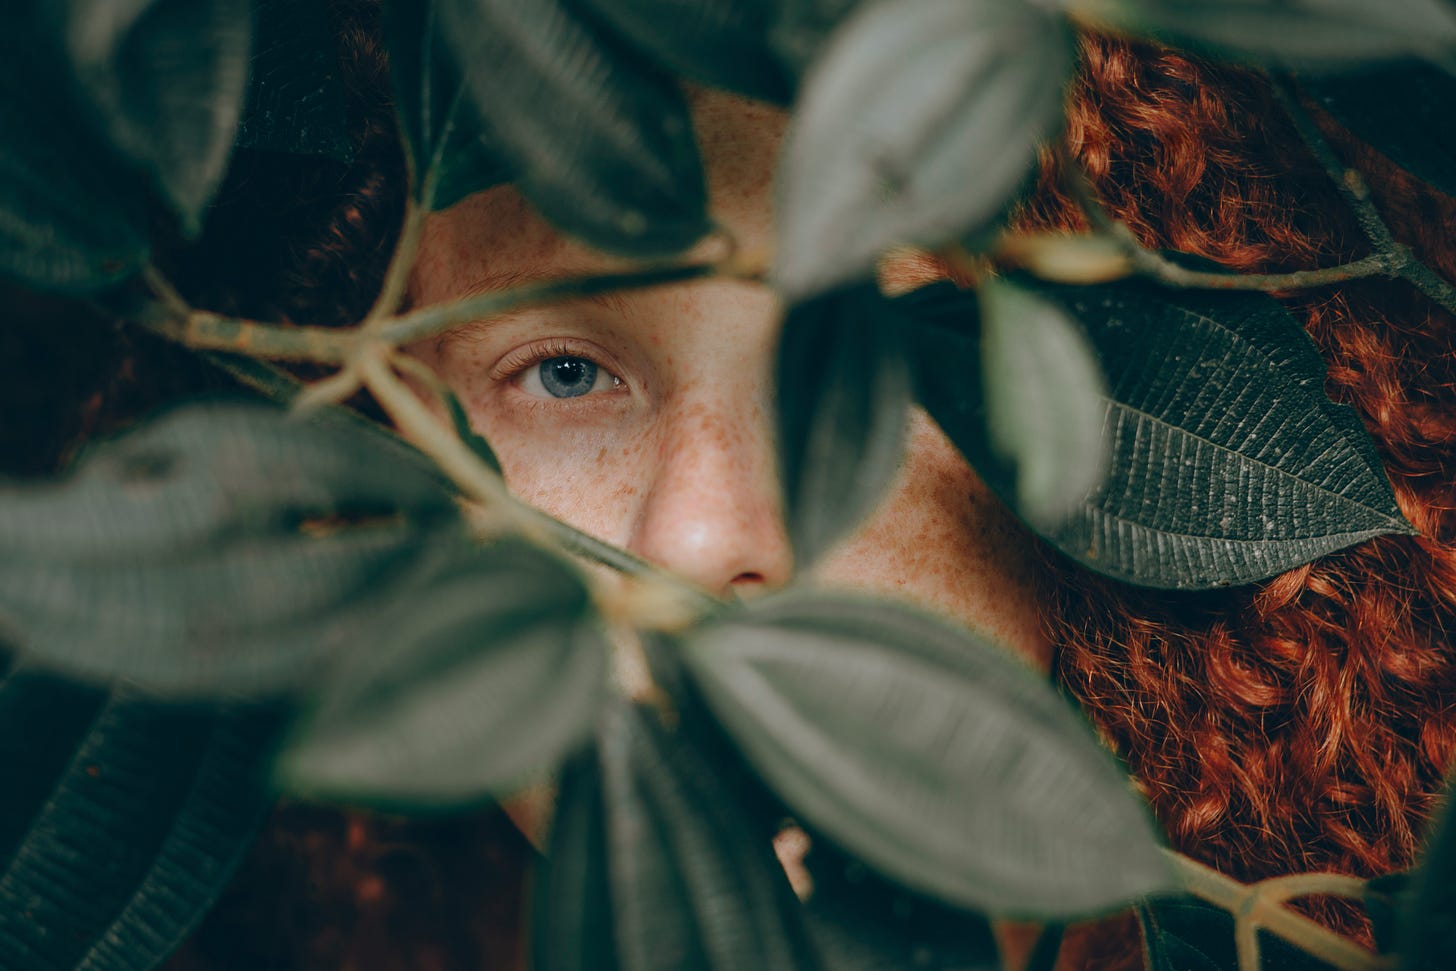 A red-haired person hiding behind green leaves.